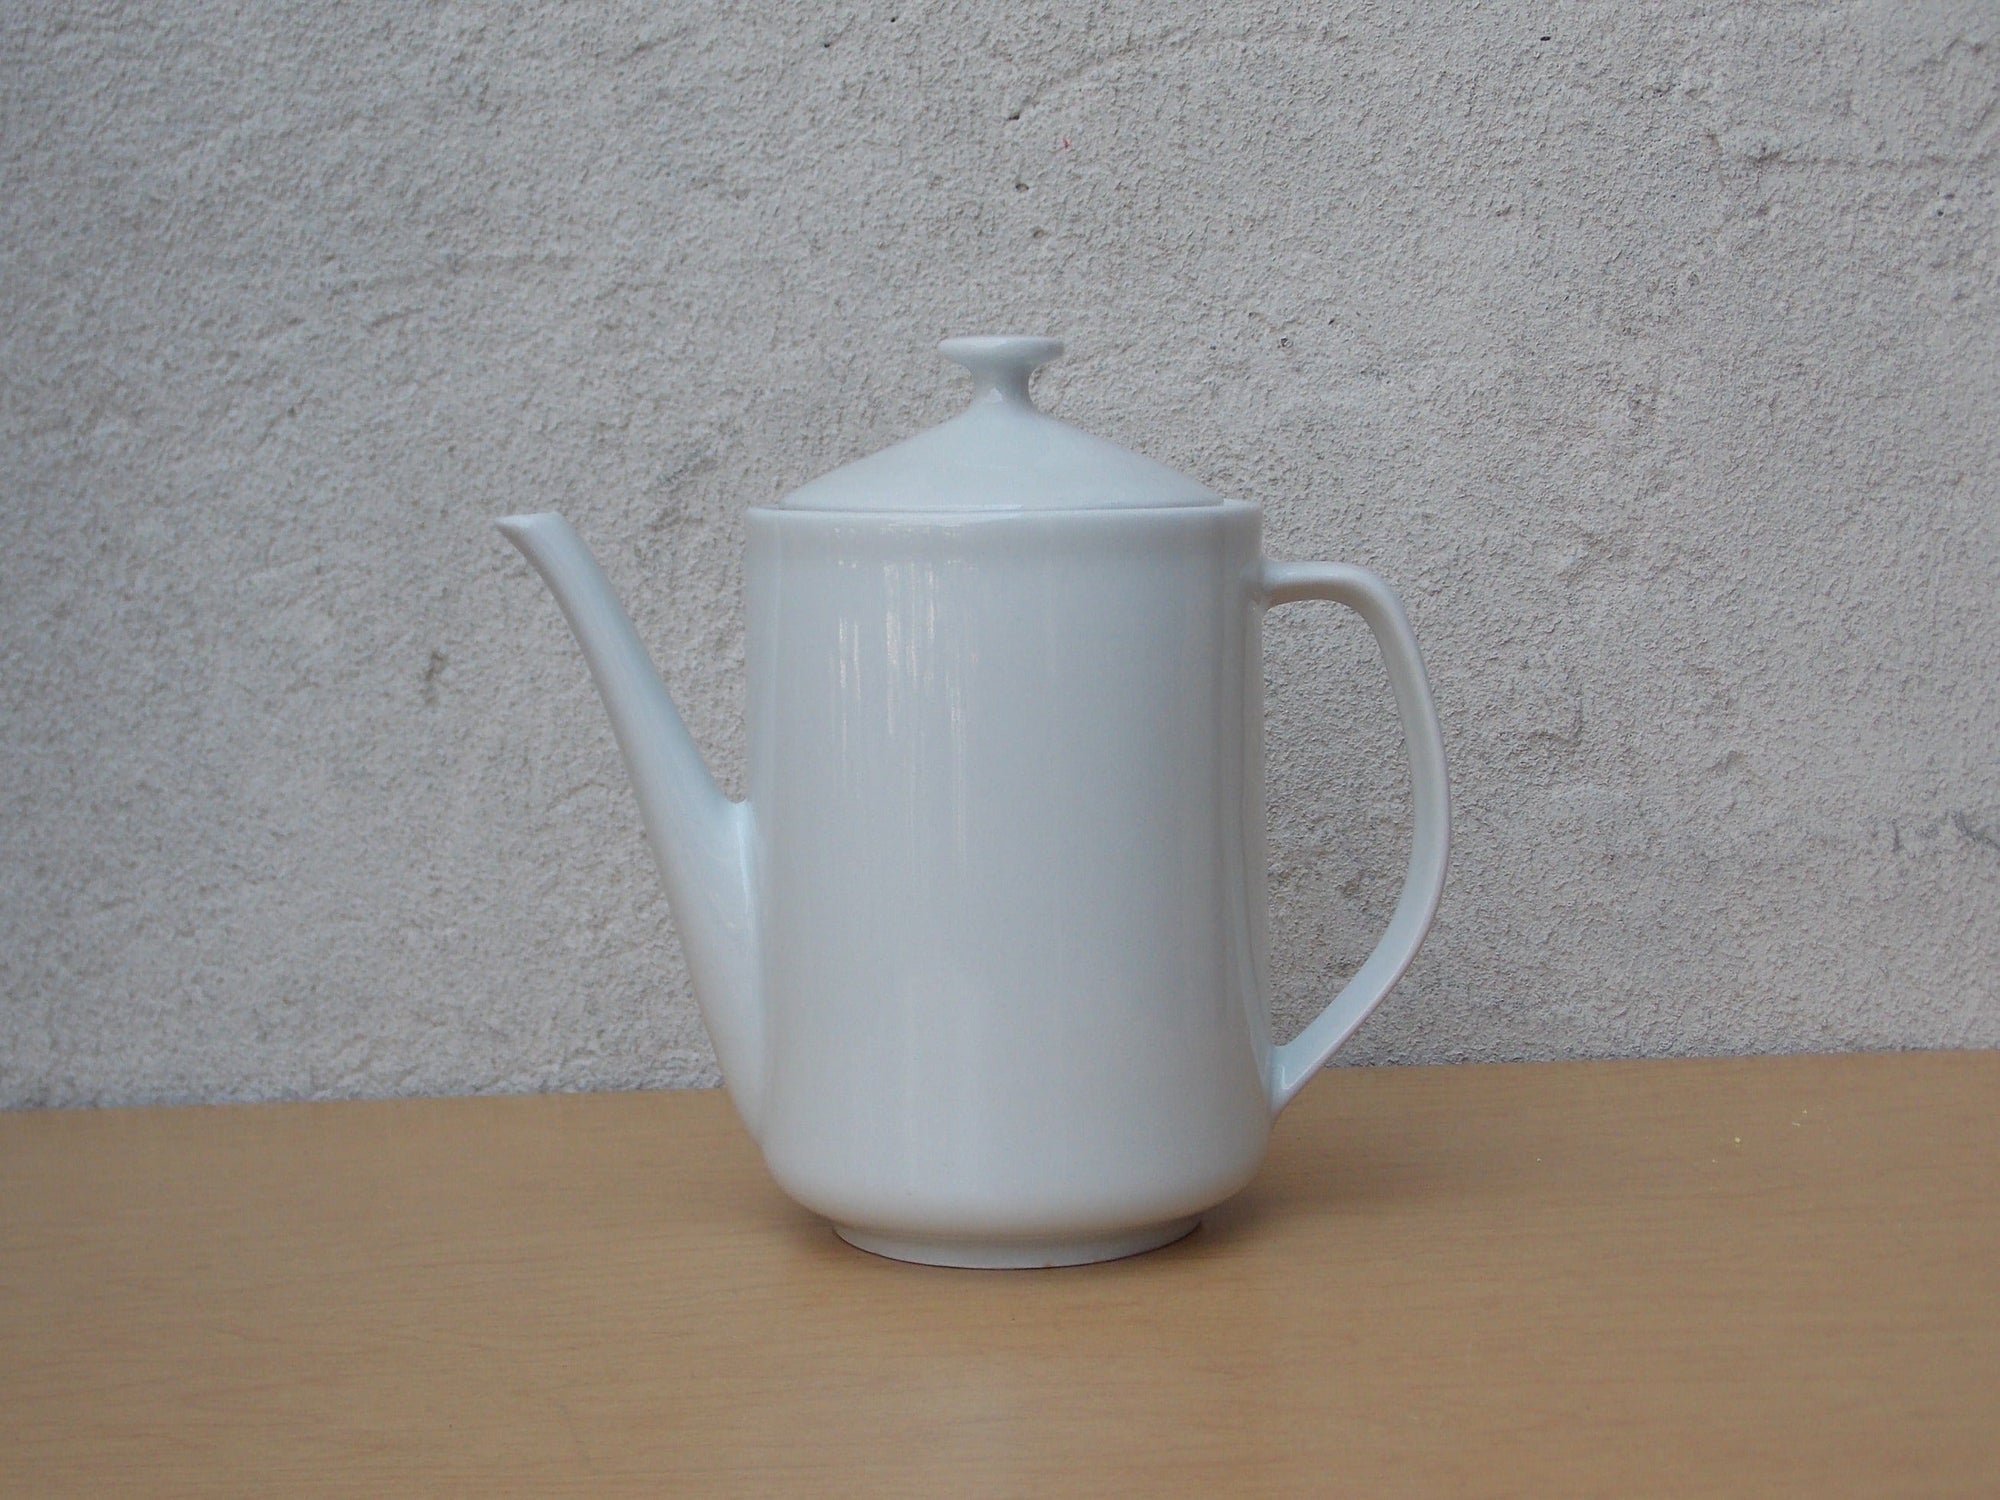 I Like Mike's Mid Century Modern Accessories Simple White Tall Modern Ceramic Teapot or Coffee Pot, Made in Brazil